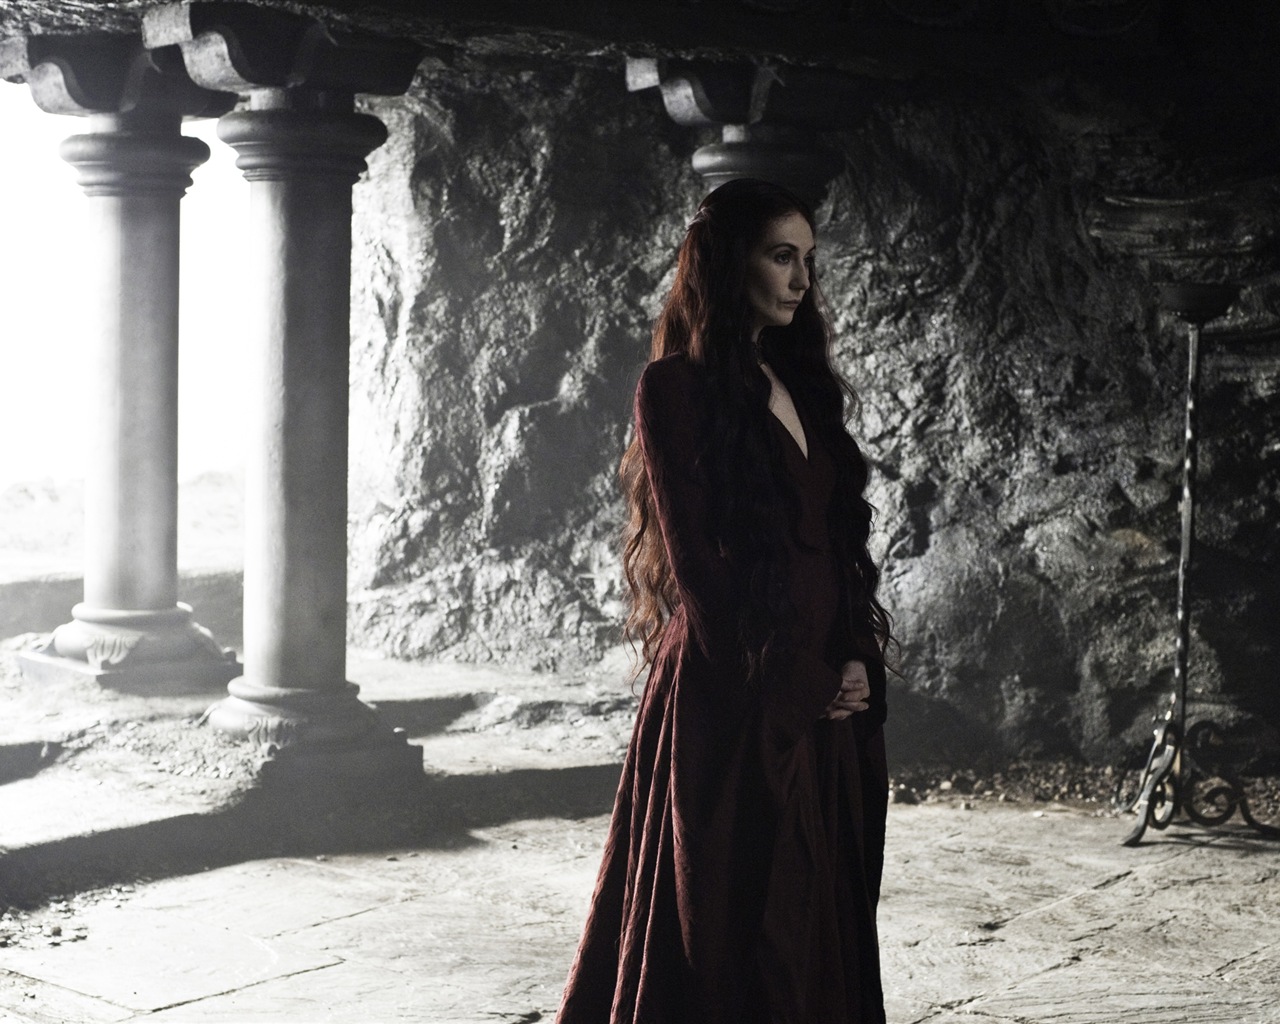 A Song of Ice and Fire: Game of Thrones fonds d'écran HD #34 - 1280x1024